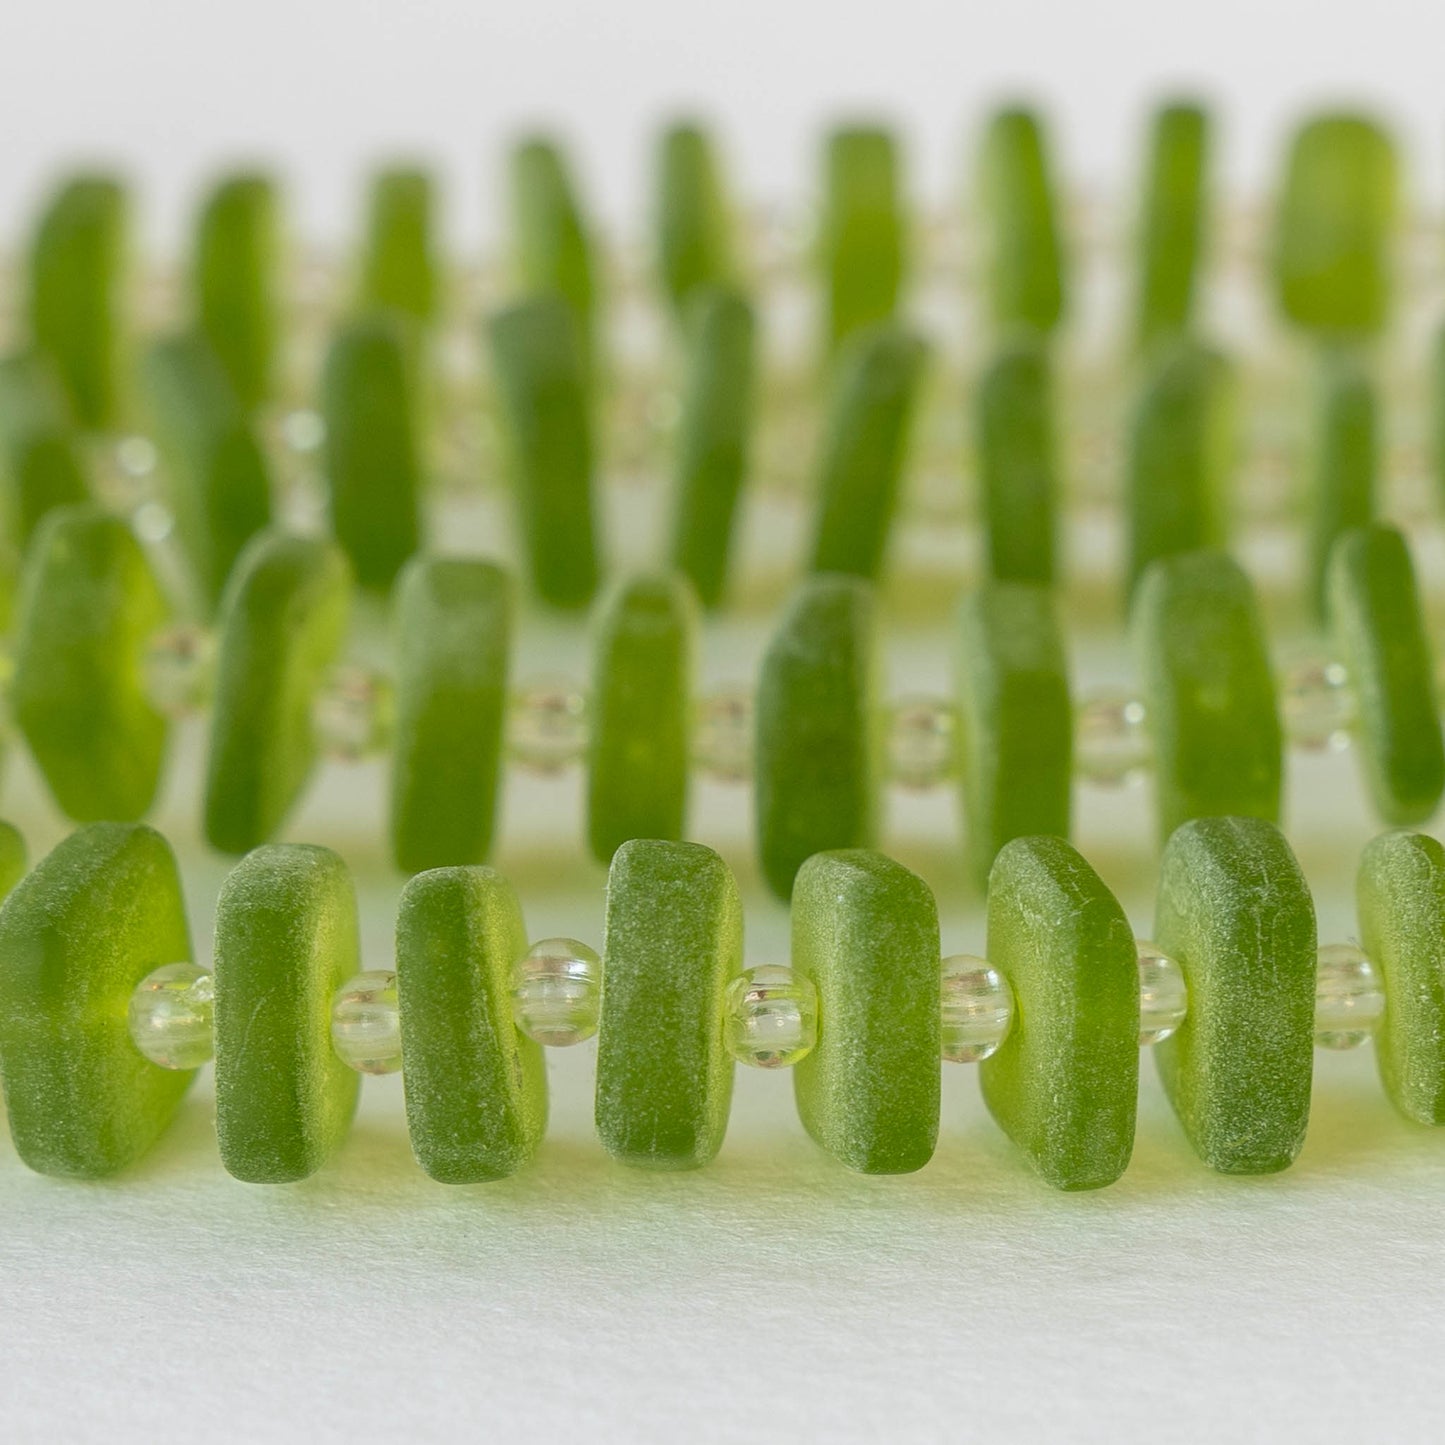 9mm Square Heishi Beads - Lime Green - 25 Beads